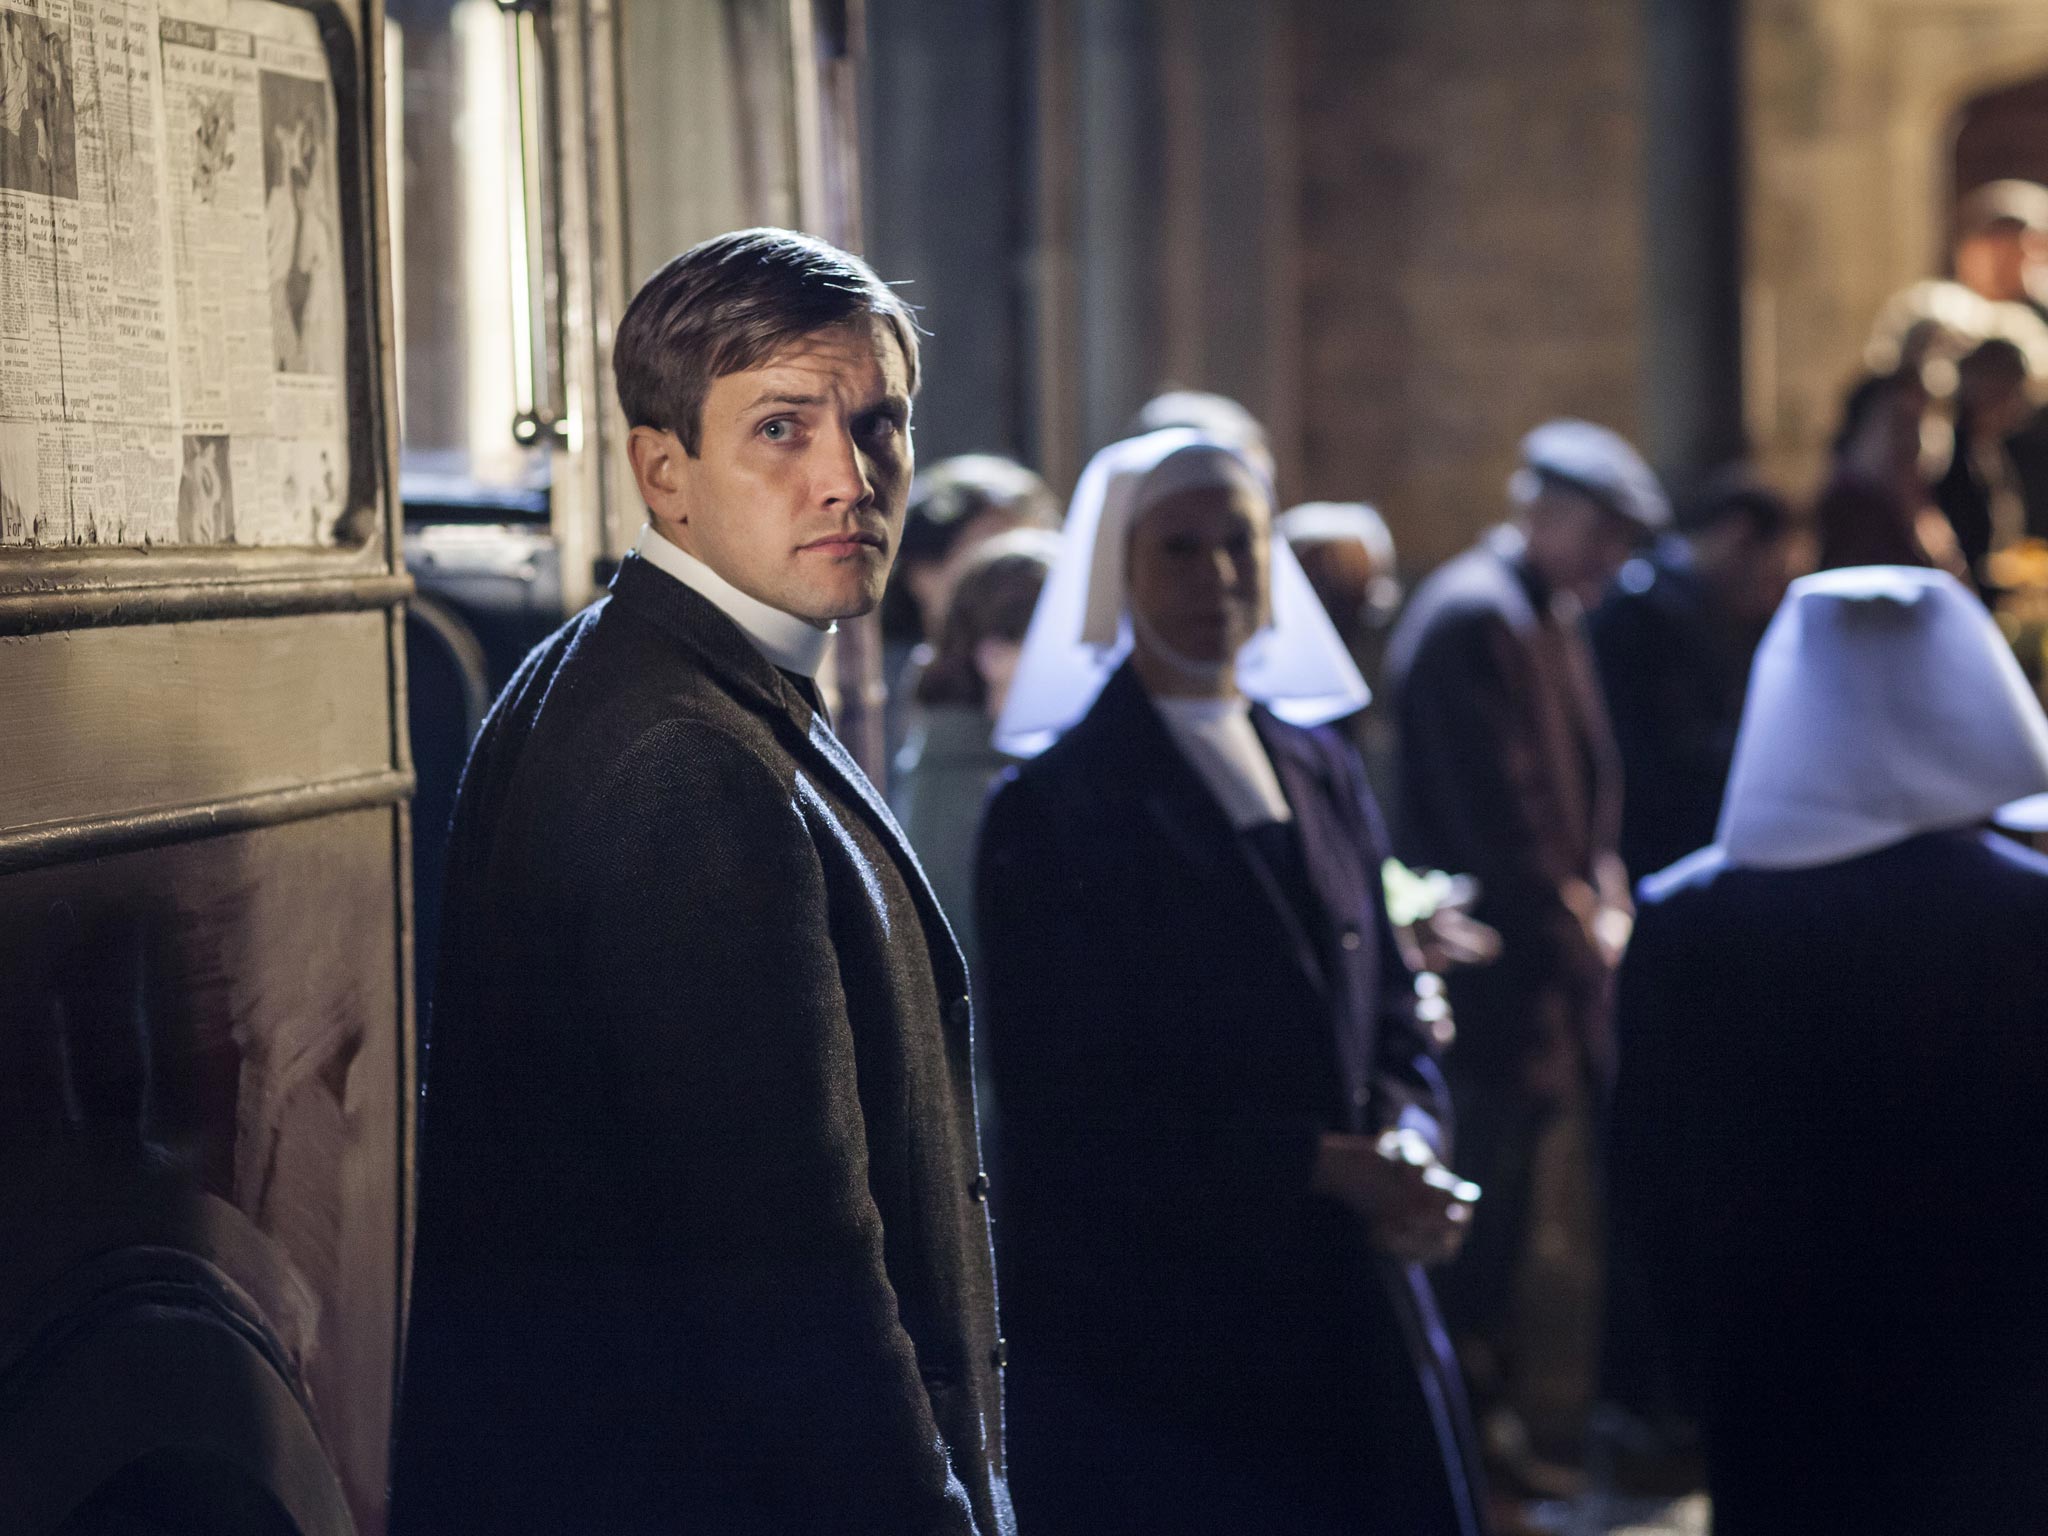 In praise of youth: Tom Hereward as the youthful vicar in Call the Midwife